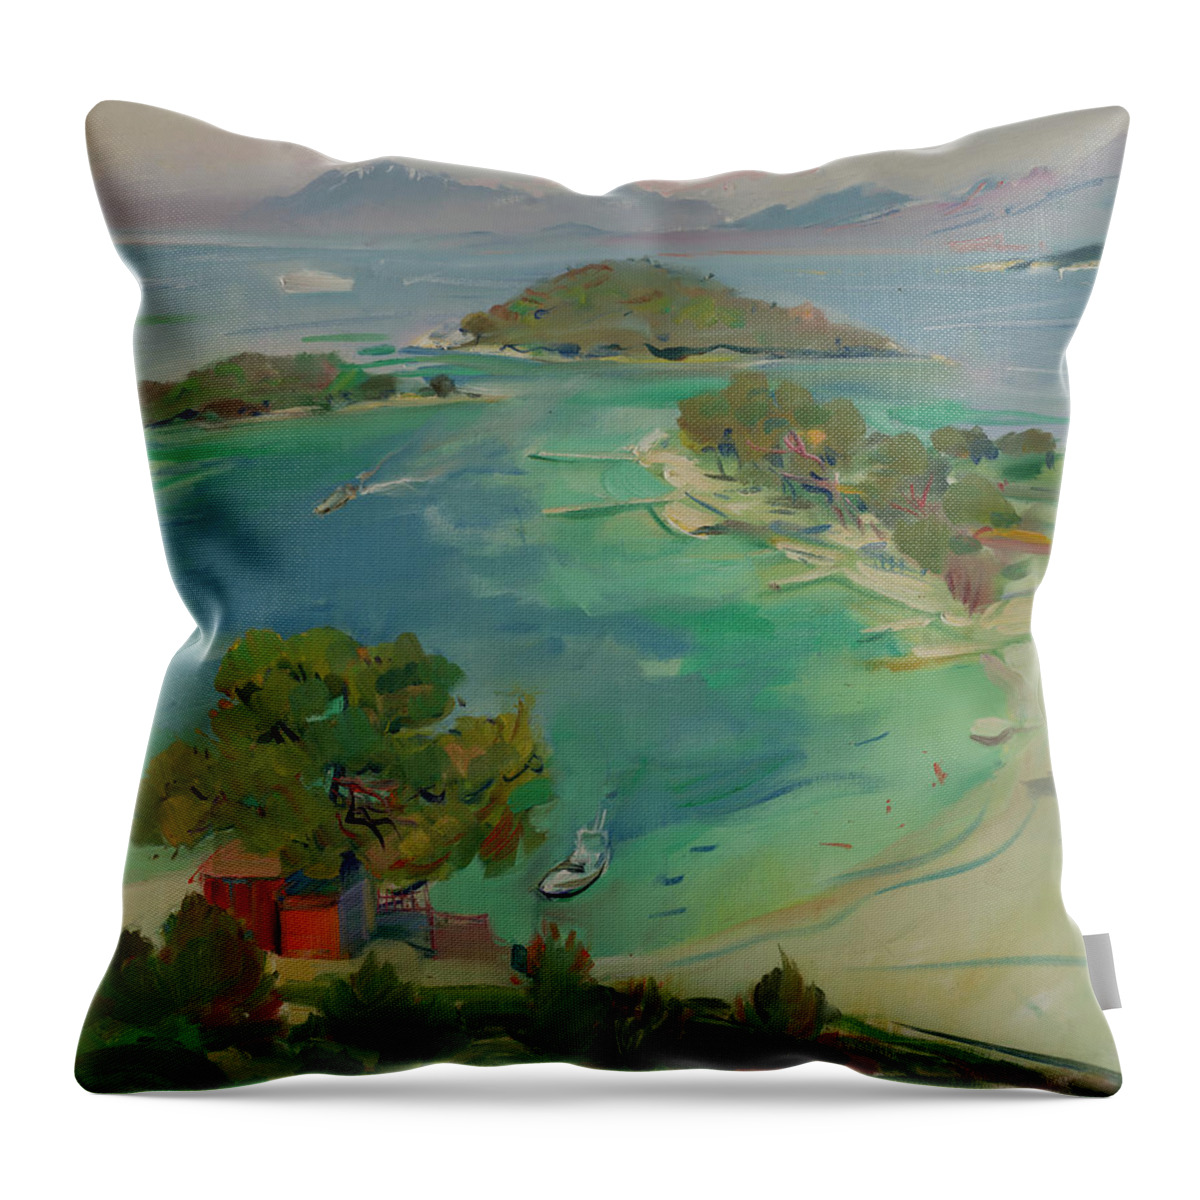 Overview Throw Pillow featuring the painting Overview of Ksamil, Saranda, Albania by Buron Kaceli